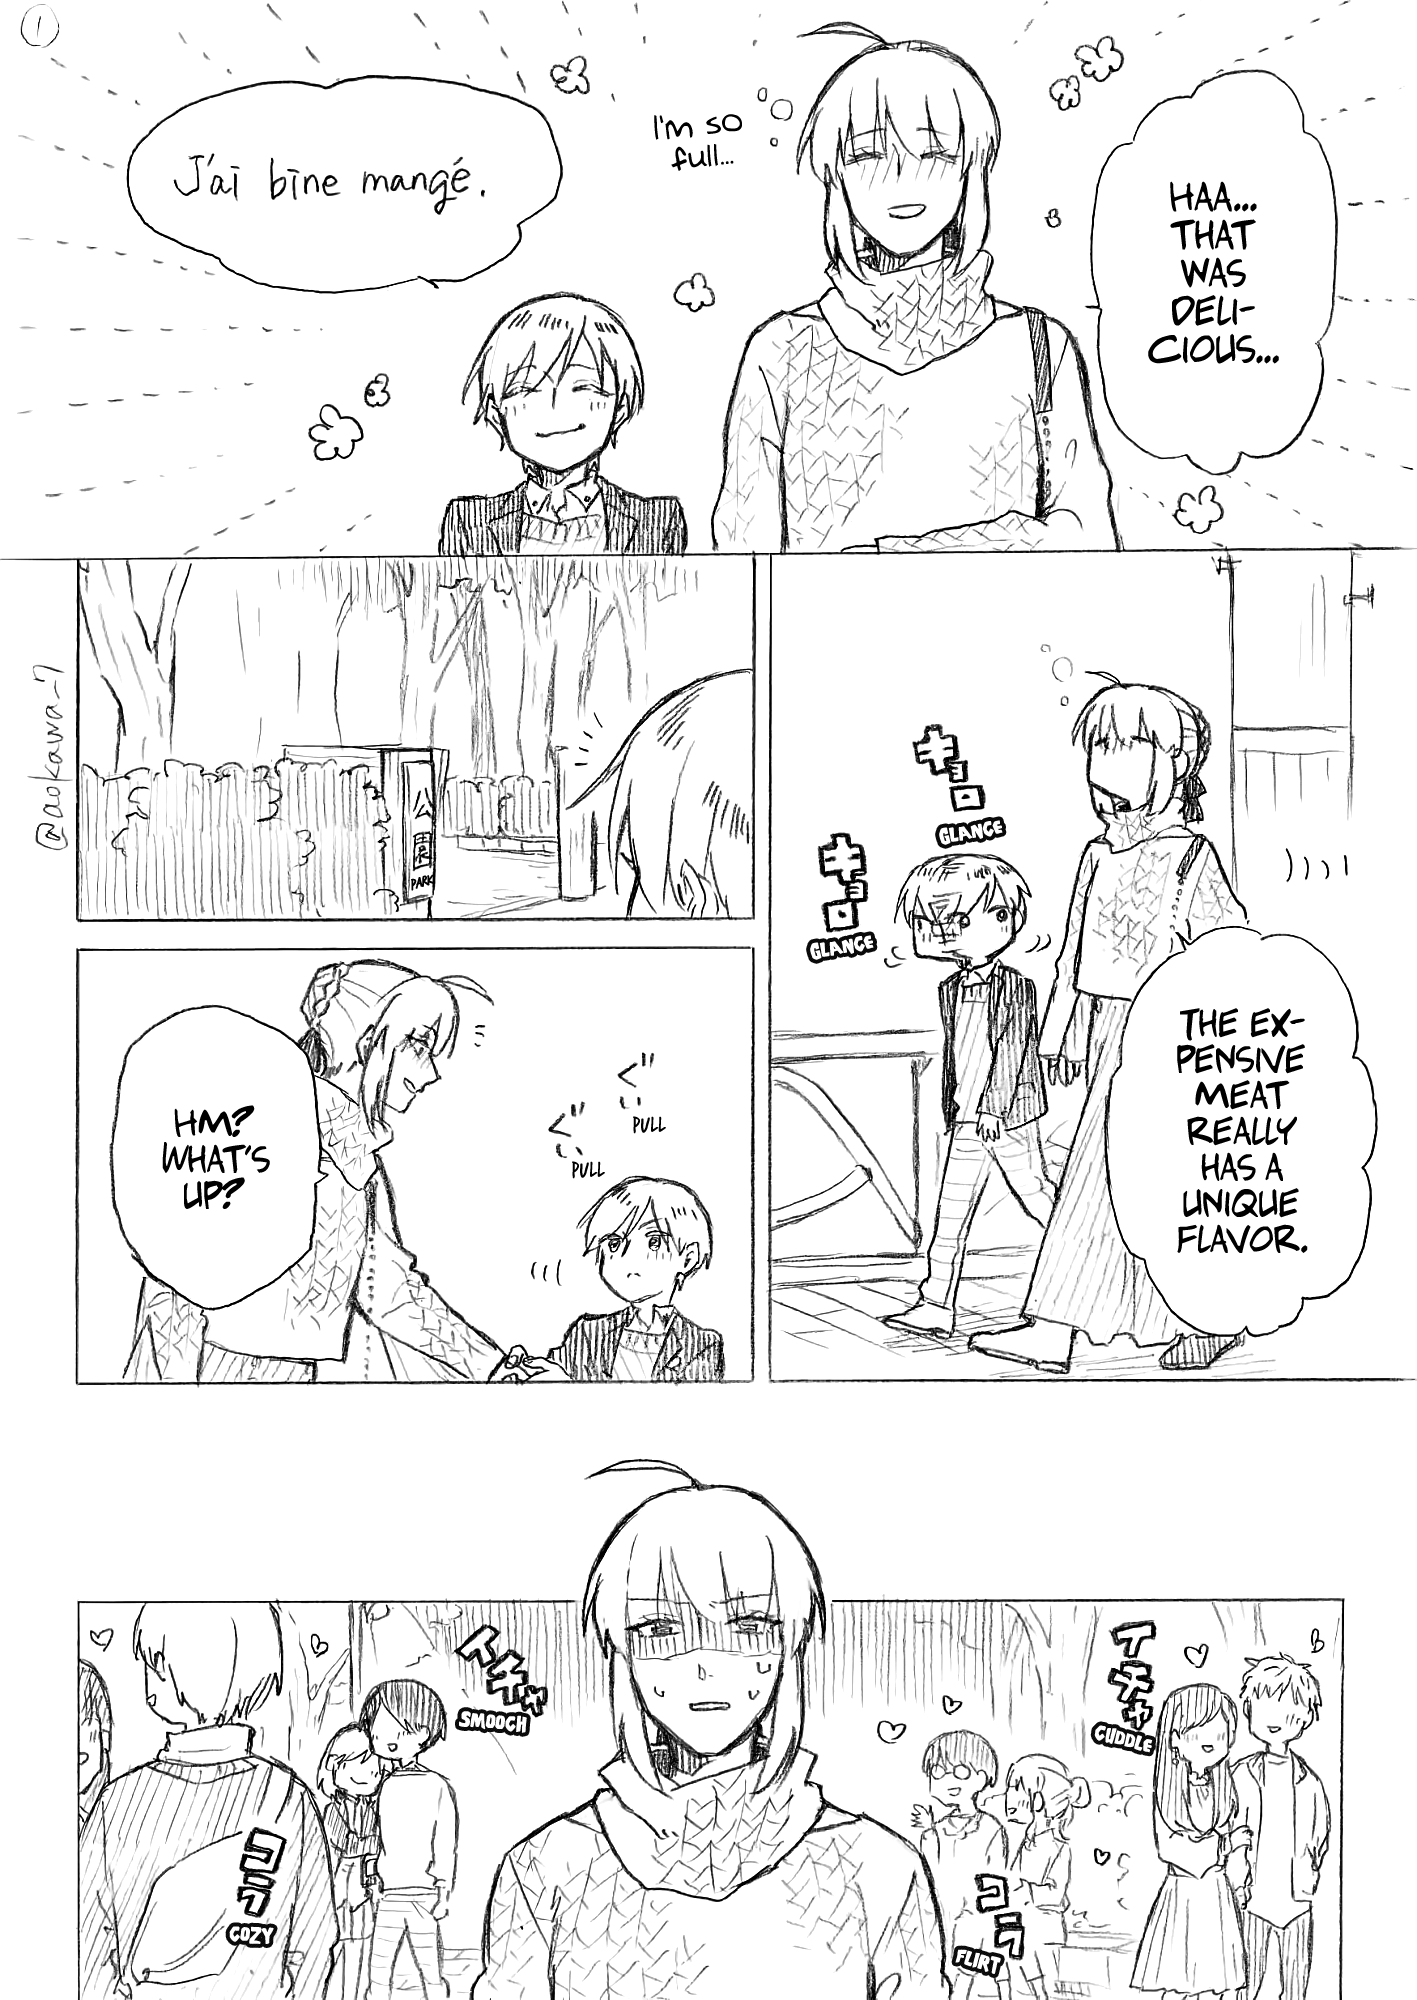 The Manga Where A Crossdressing Cosplayer Gets A Brother - Page 2